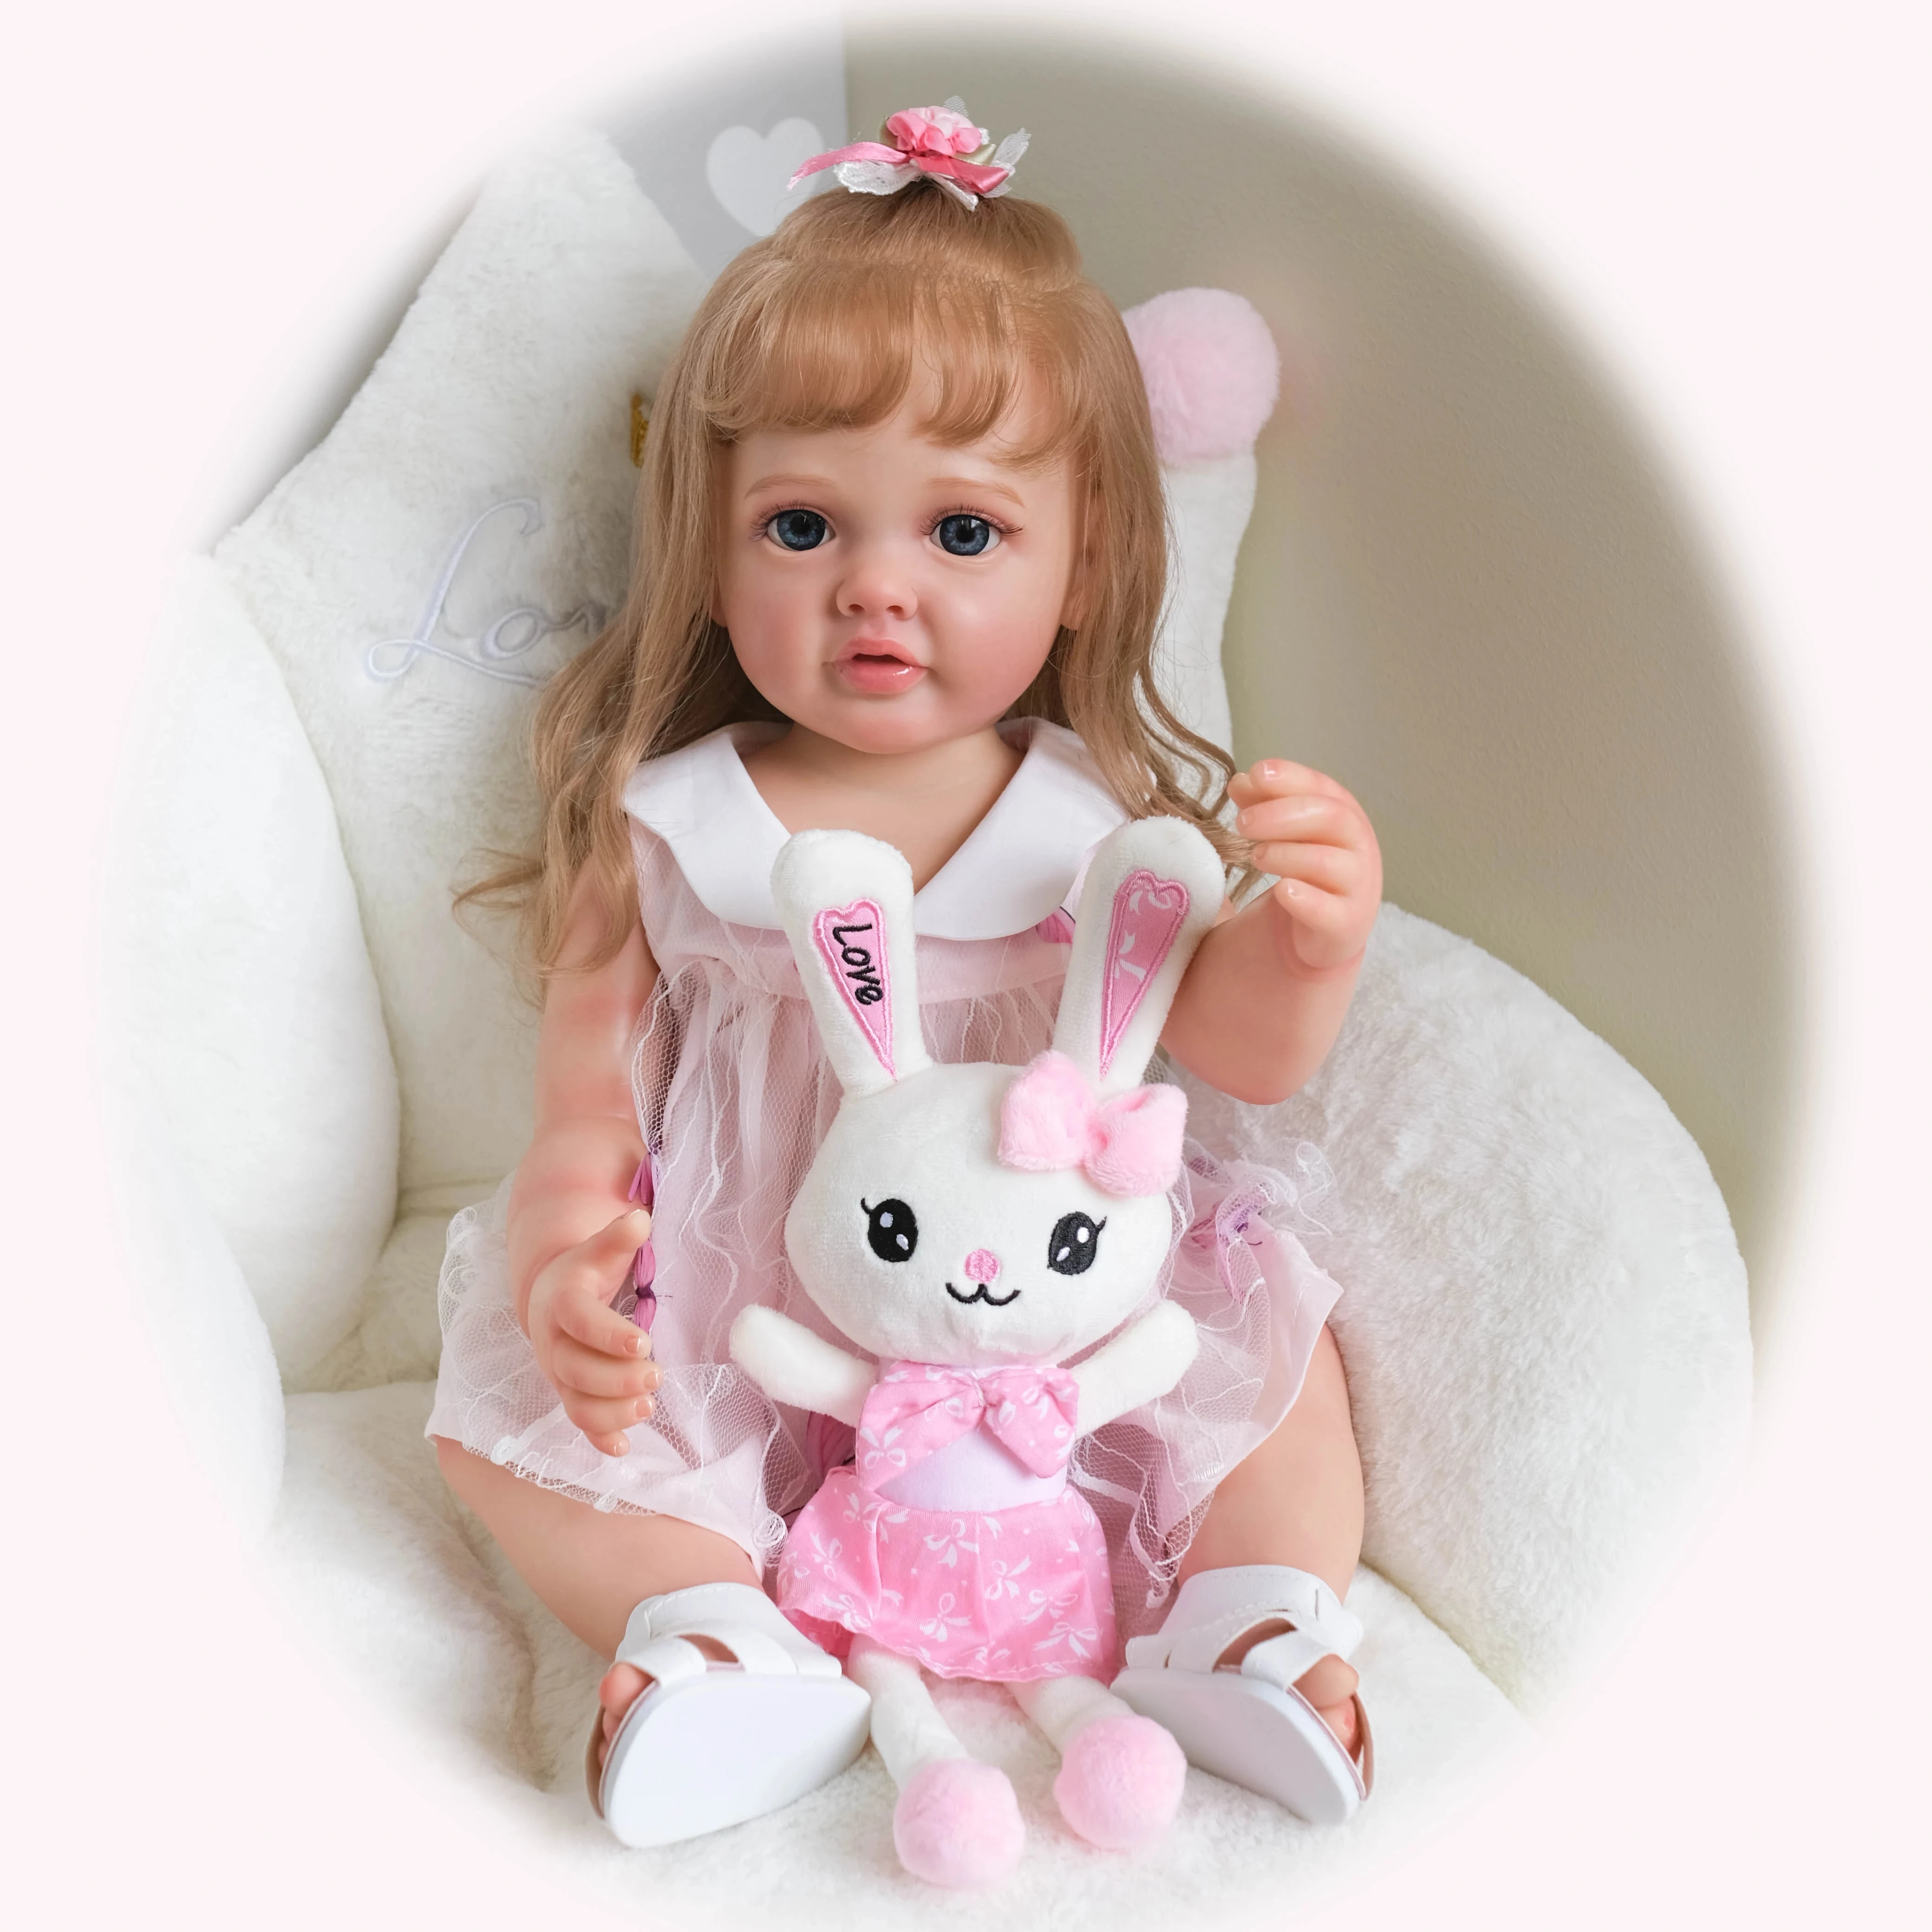 

New 55CM Full Body Silicone Reborn Princeess Betty Toddler Lifelike Handmade 3D Skin Multiple Layers Painting with Visible Veins